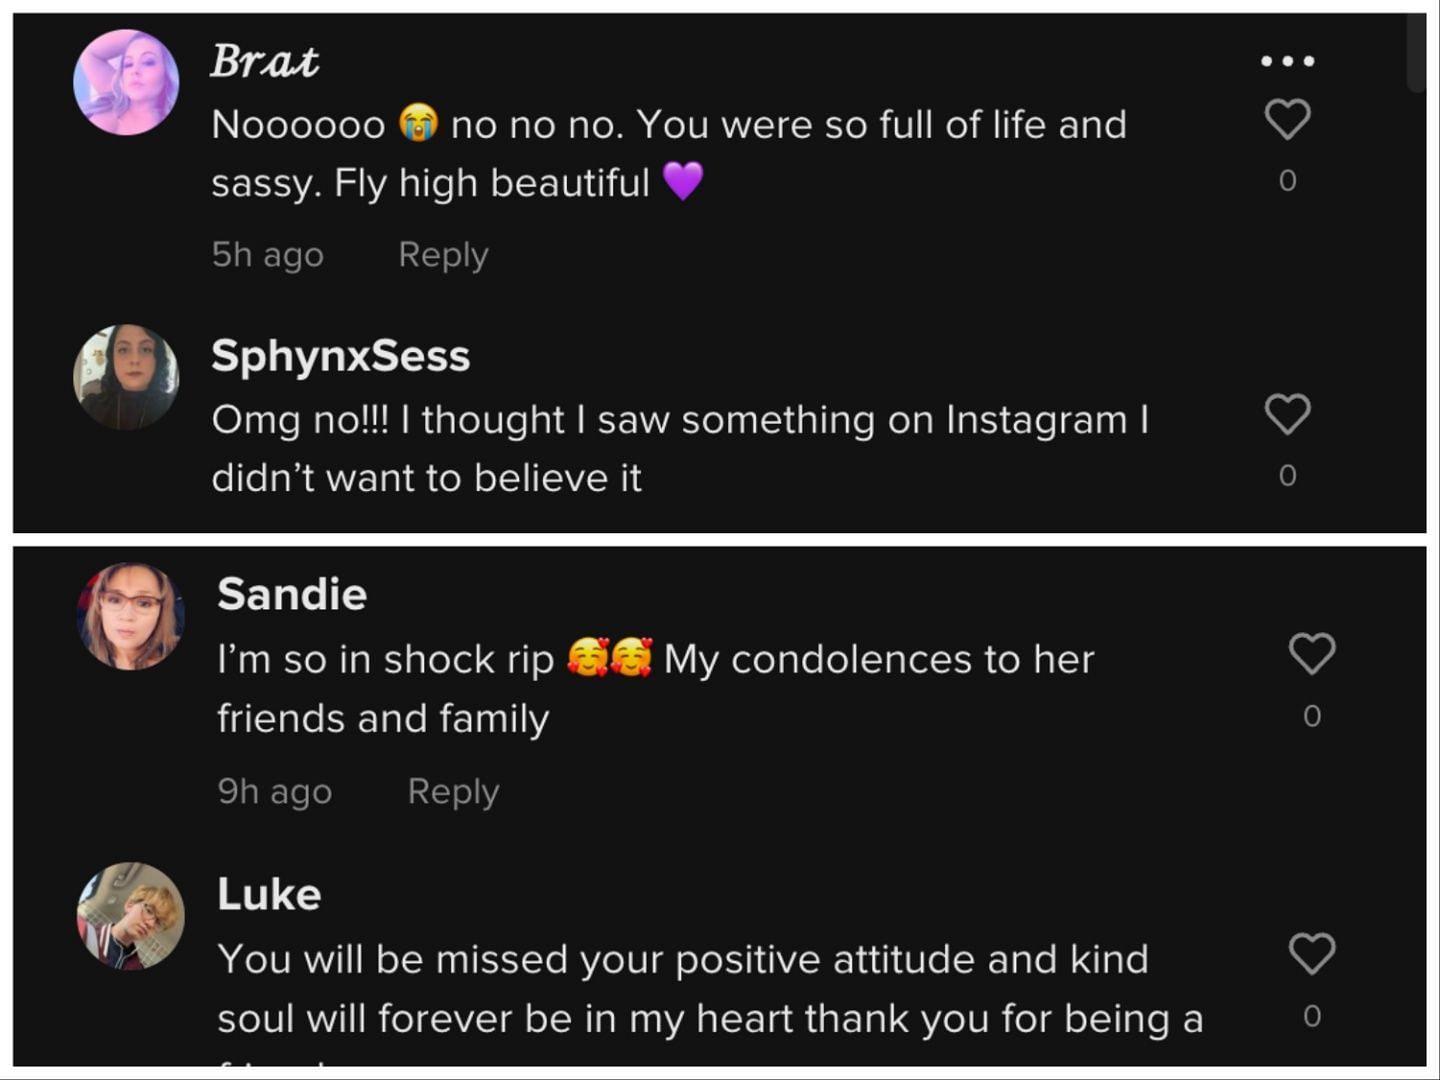 Social media users mourn the loss of Vanessa Vincenzo Barrett who shockingly passed away: Reason of demise not known yet. (Image via TikTok)